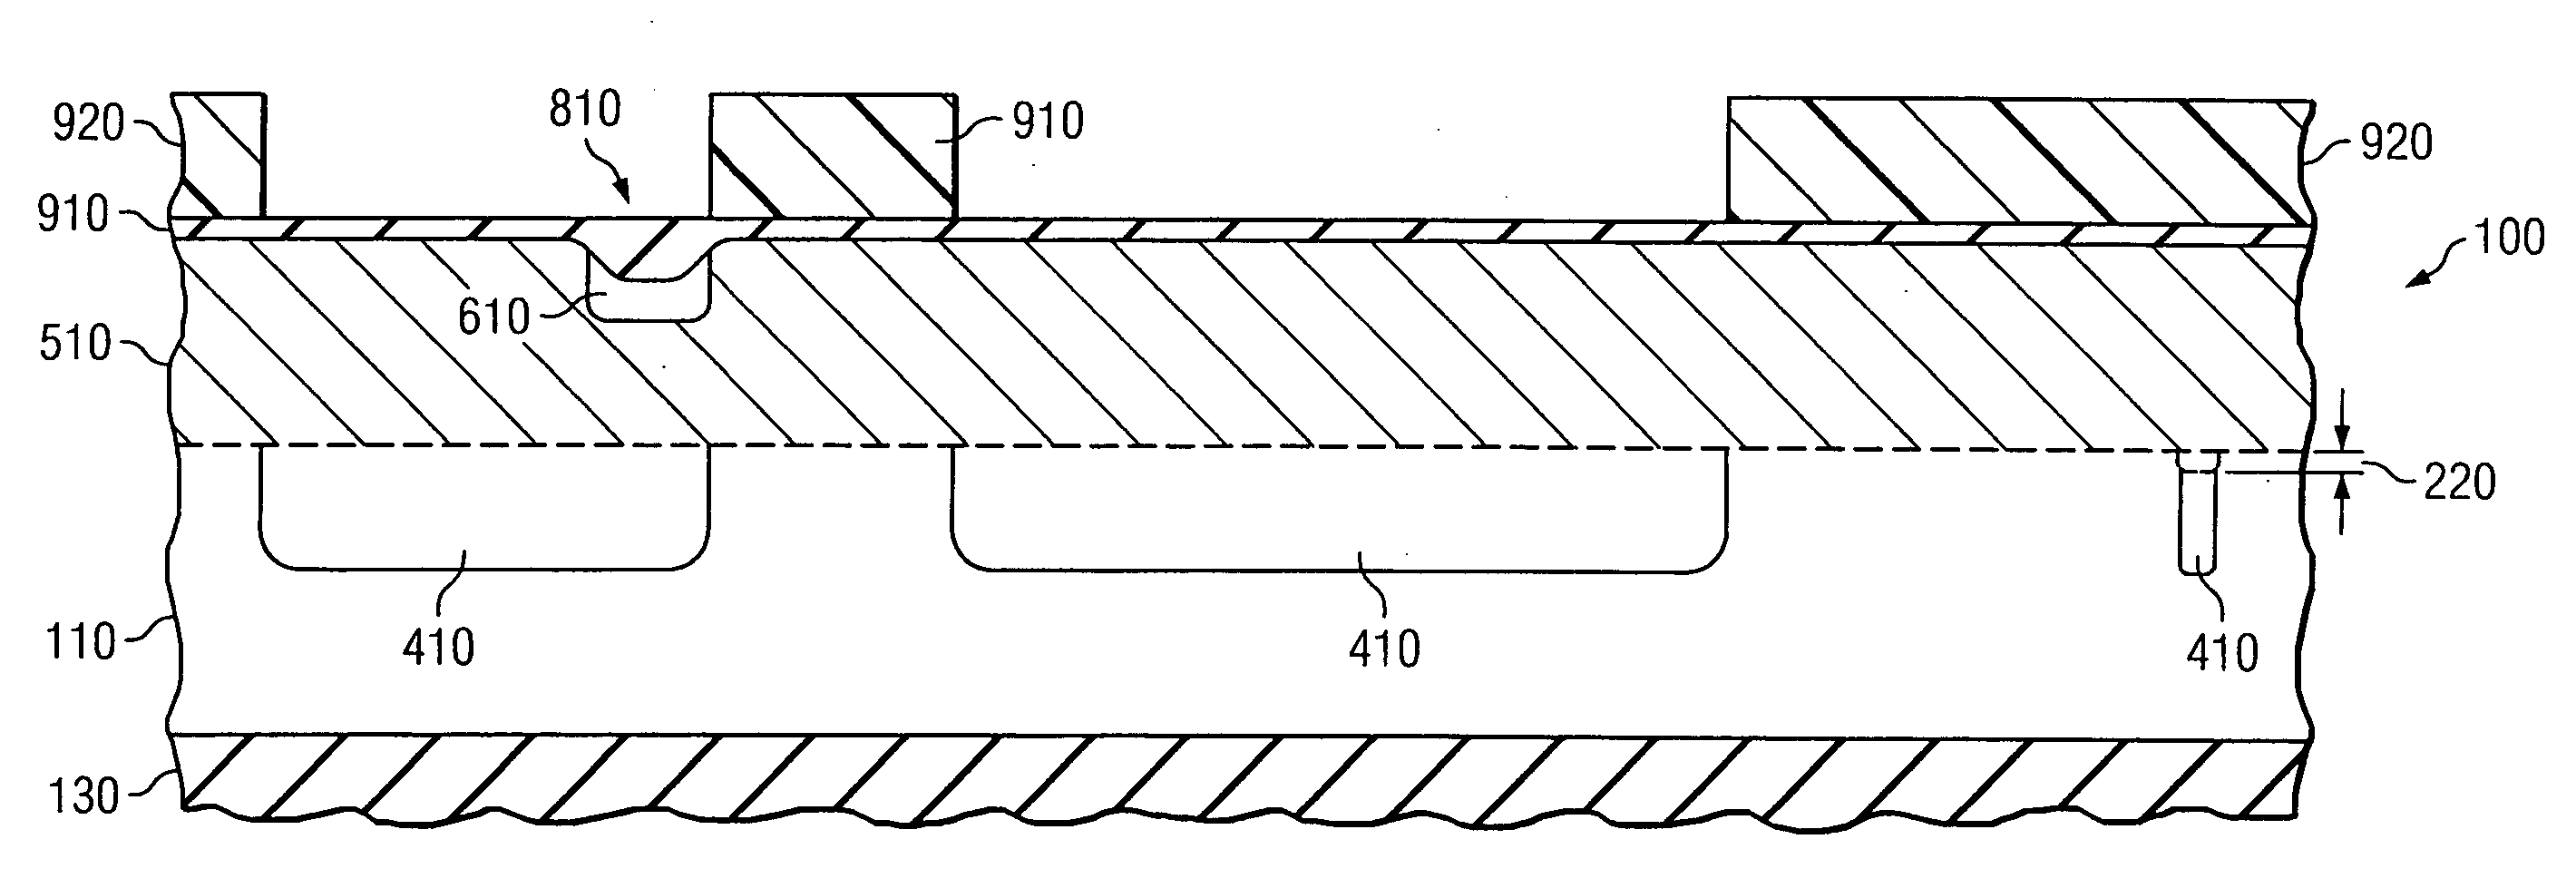 Method for manufacturing a semiconductor device having an alignment feature formed using an N-type dopant and a wet oxidation process